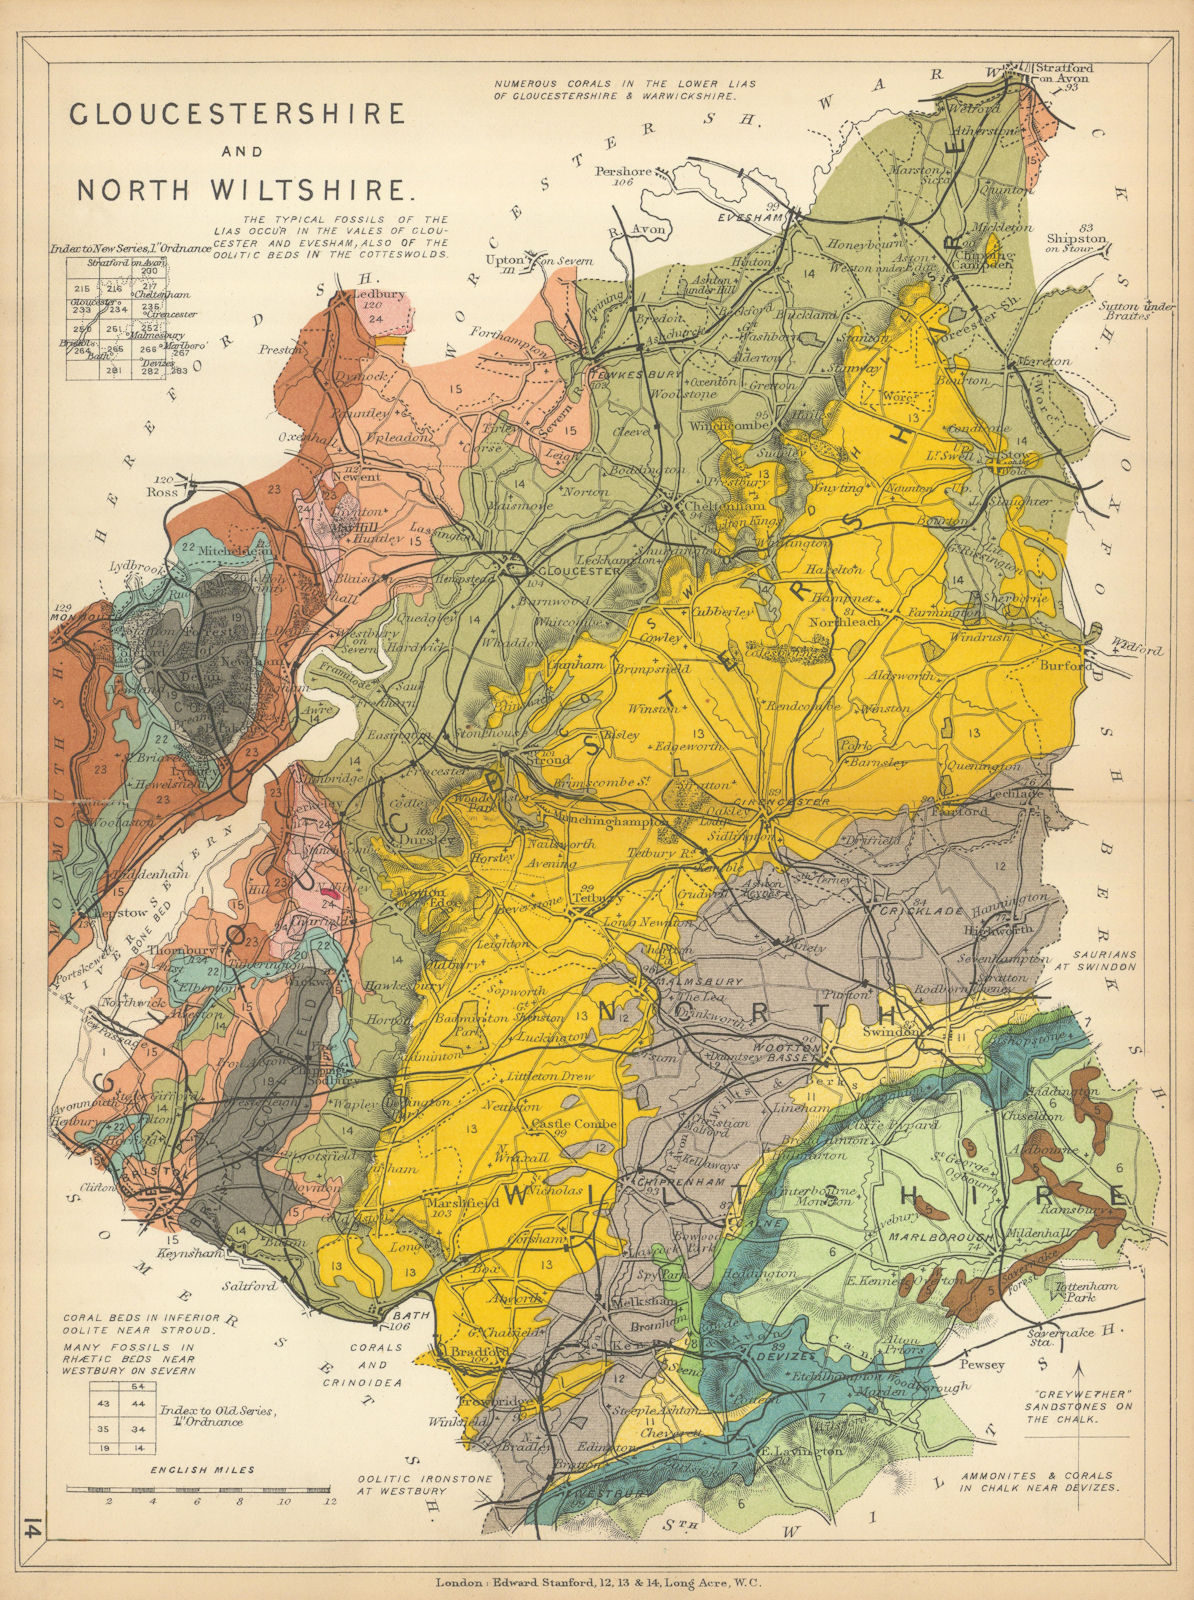 GLOUCESTERSHIRE AND NORTH WILTSHIRE Geological map. STANFORD 1904 old